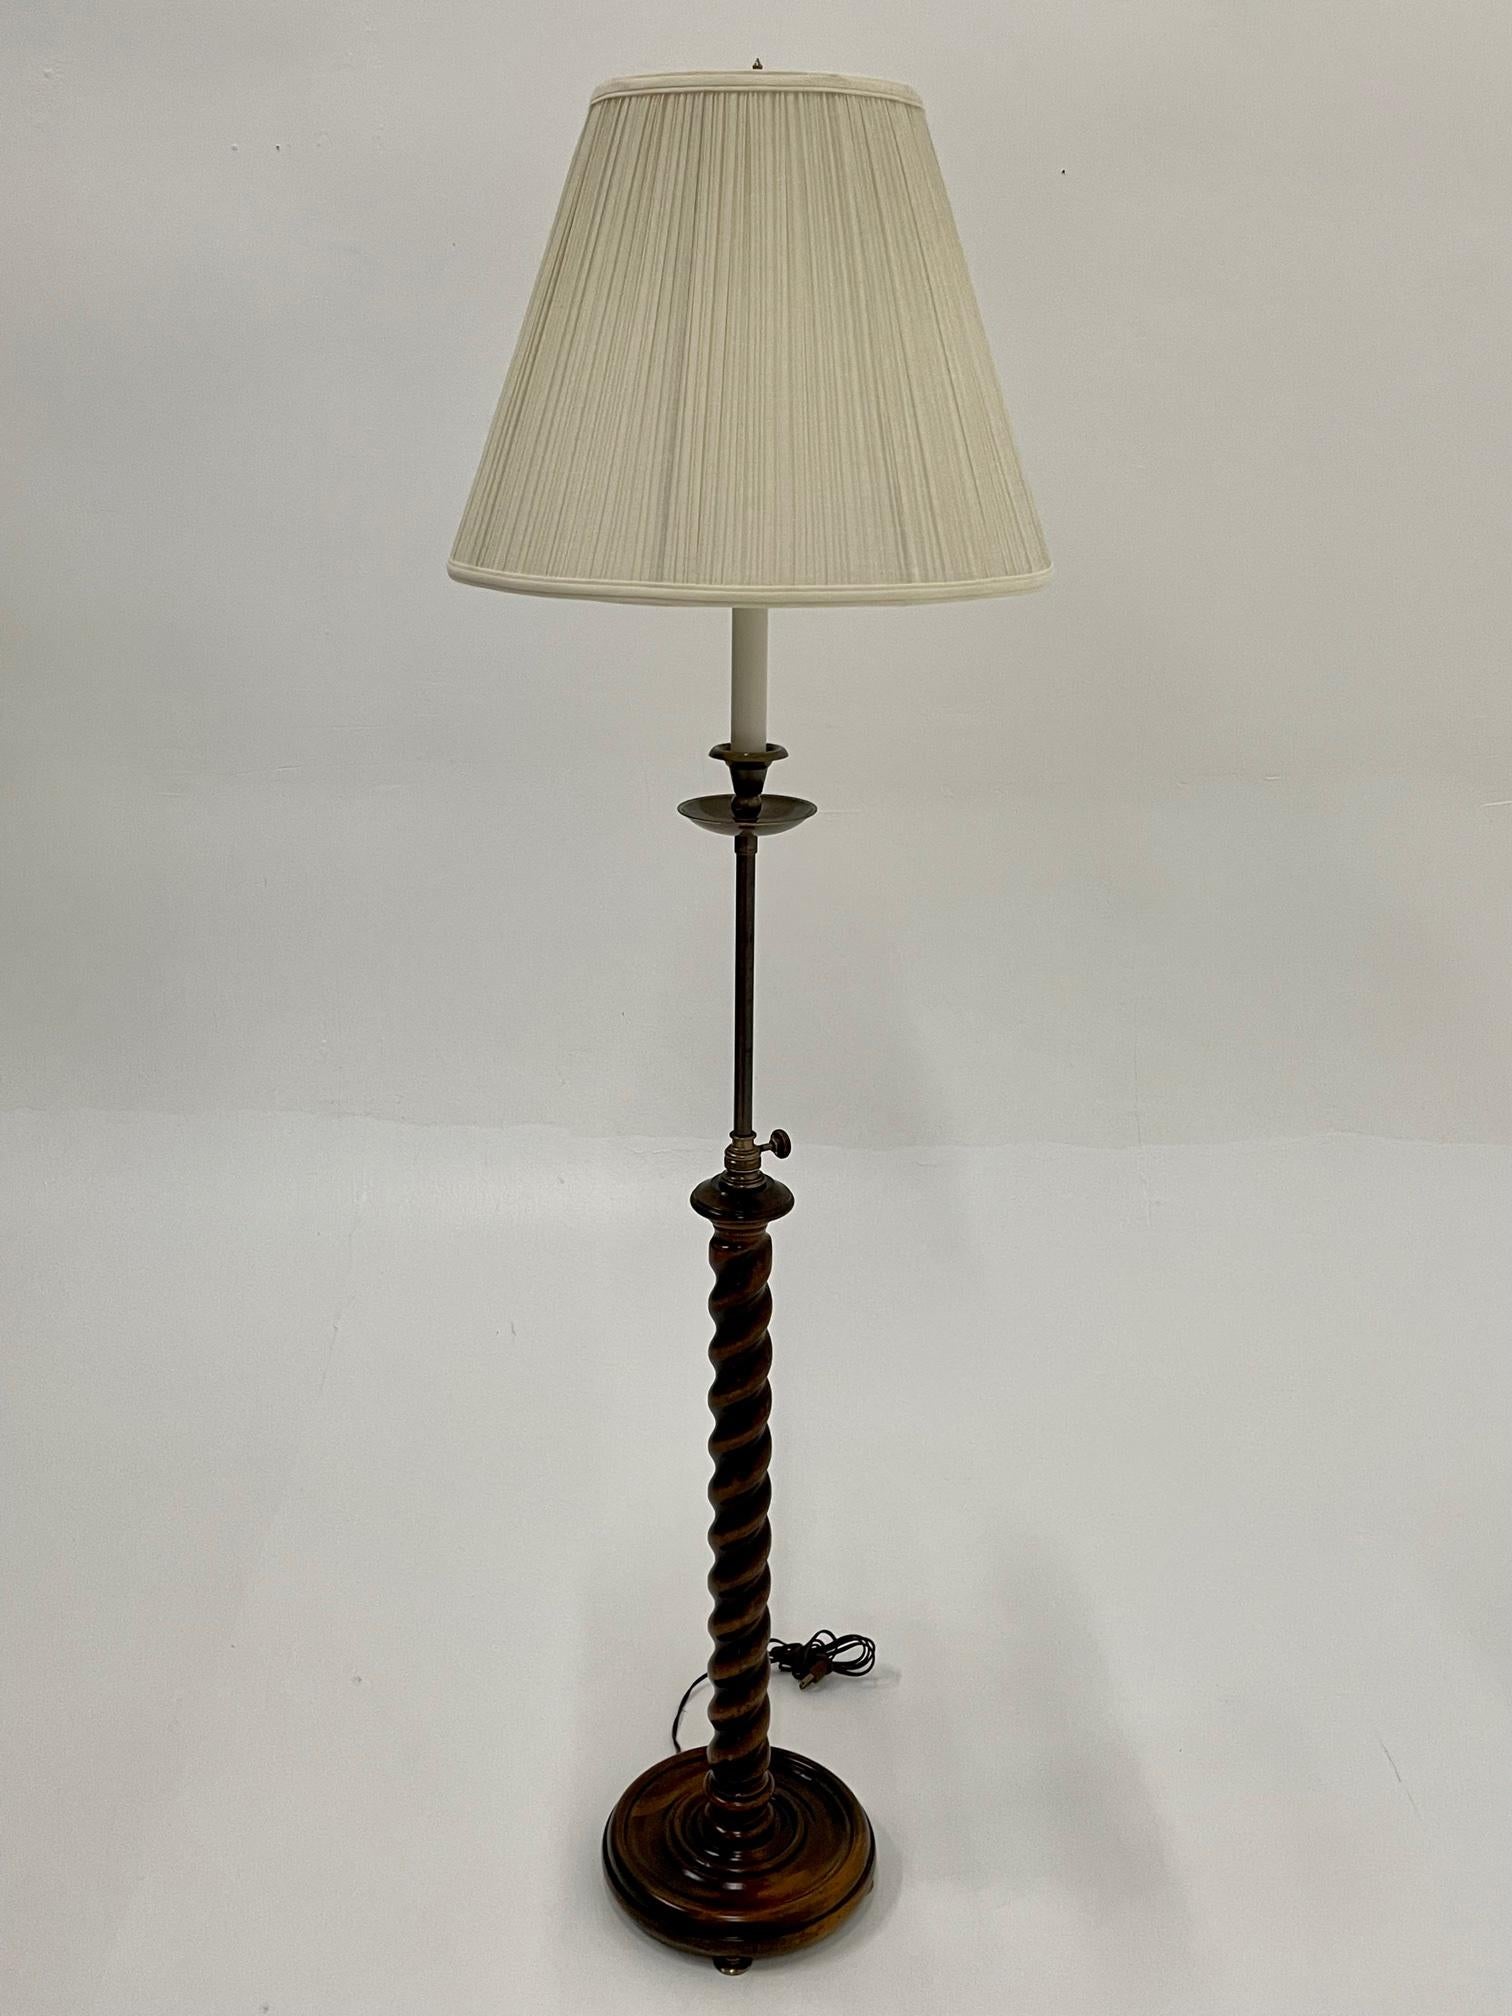 Mahogany & brass floor lamp having handsome barley twist on adjustable column. Faded Frederick Cooper label. Shade not included.